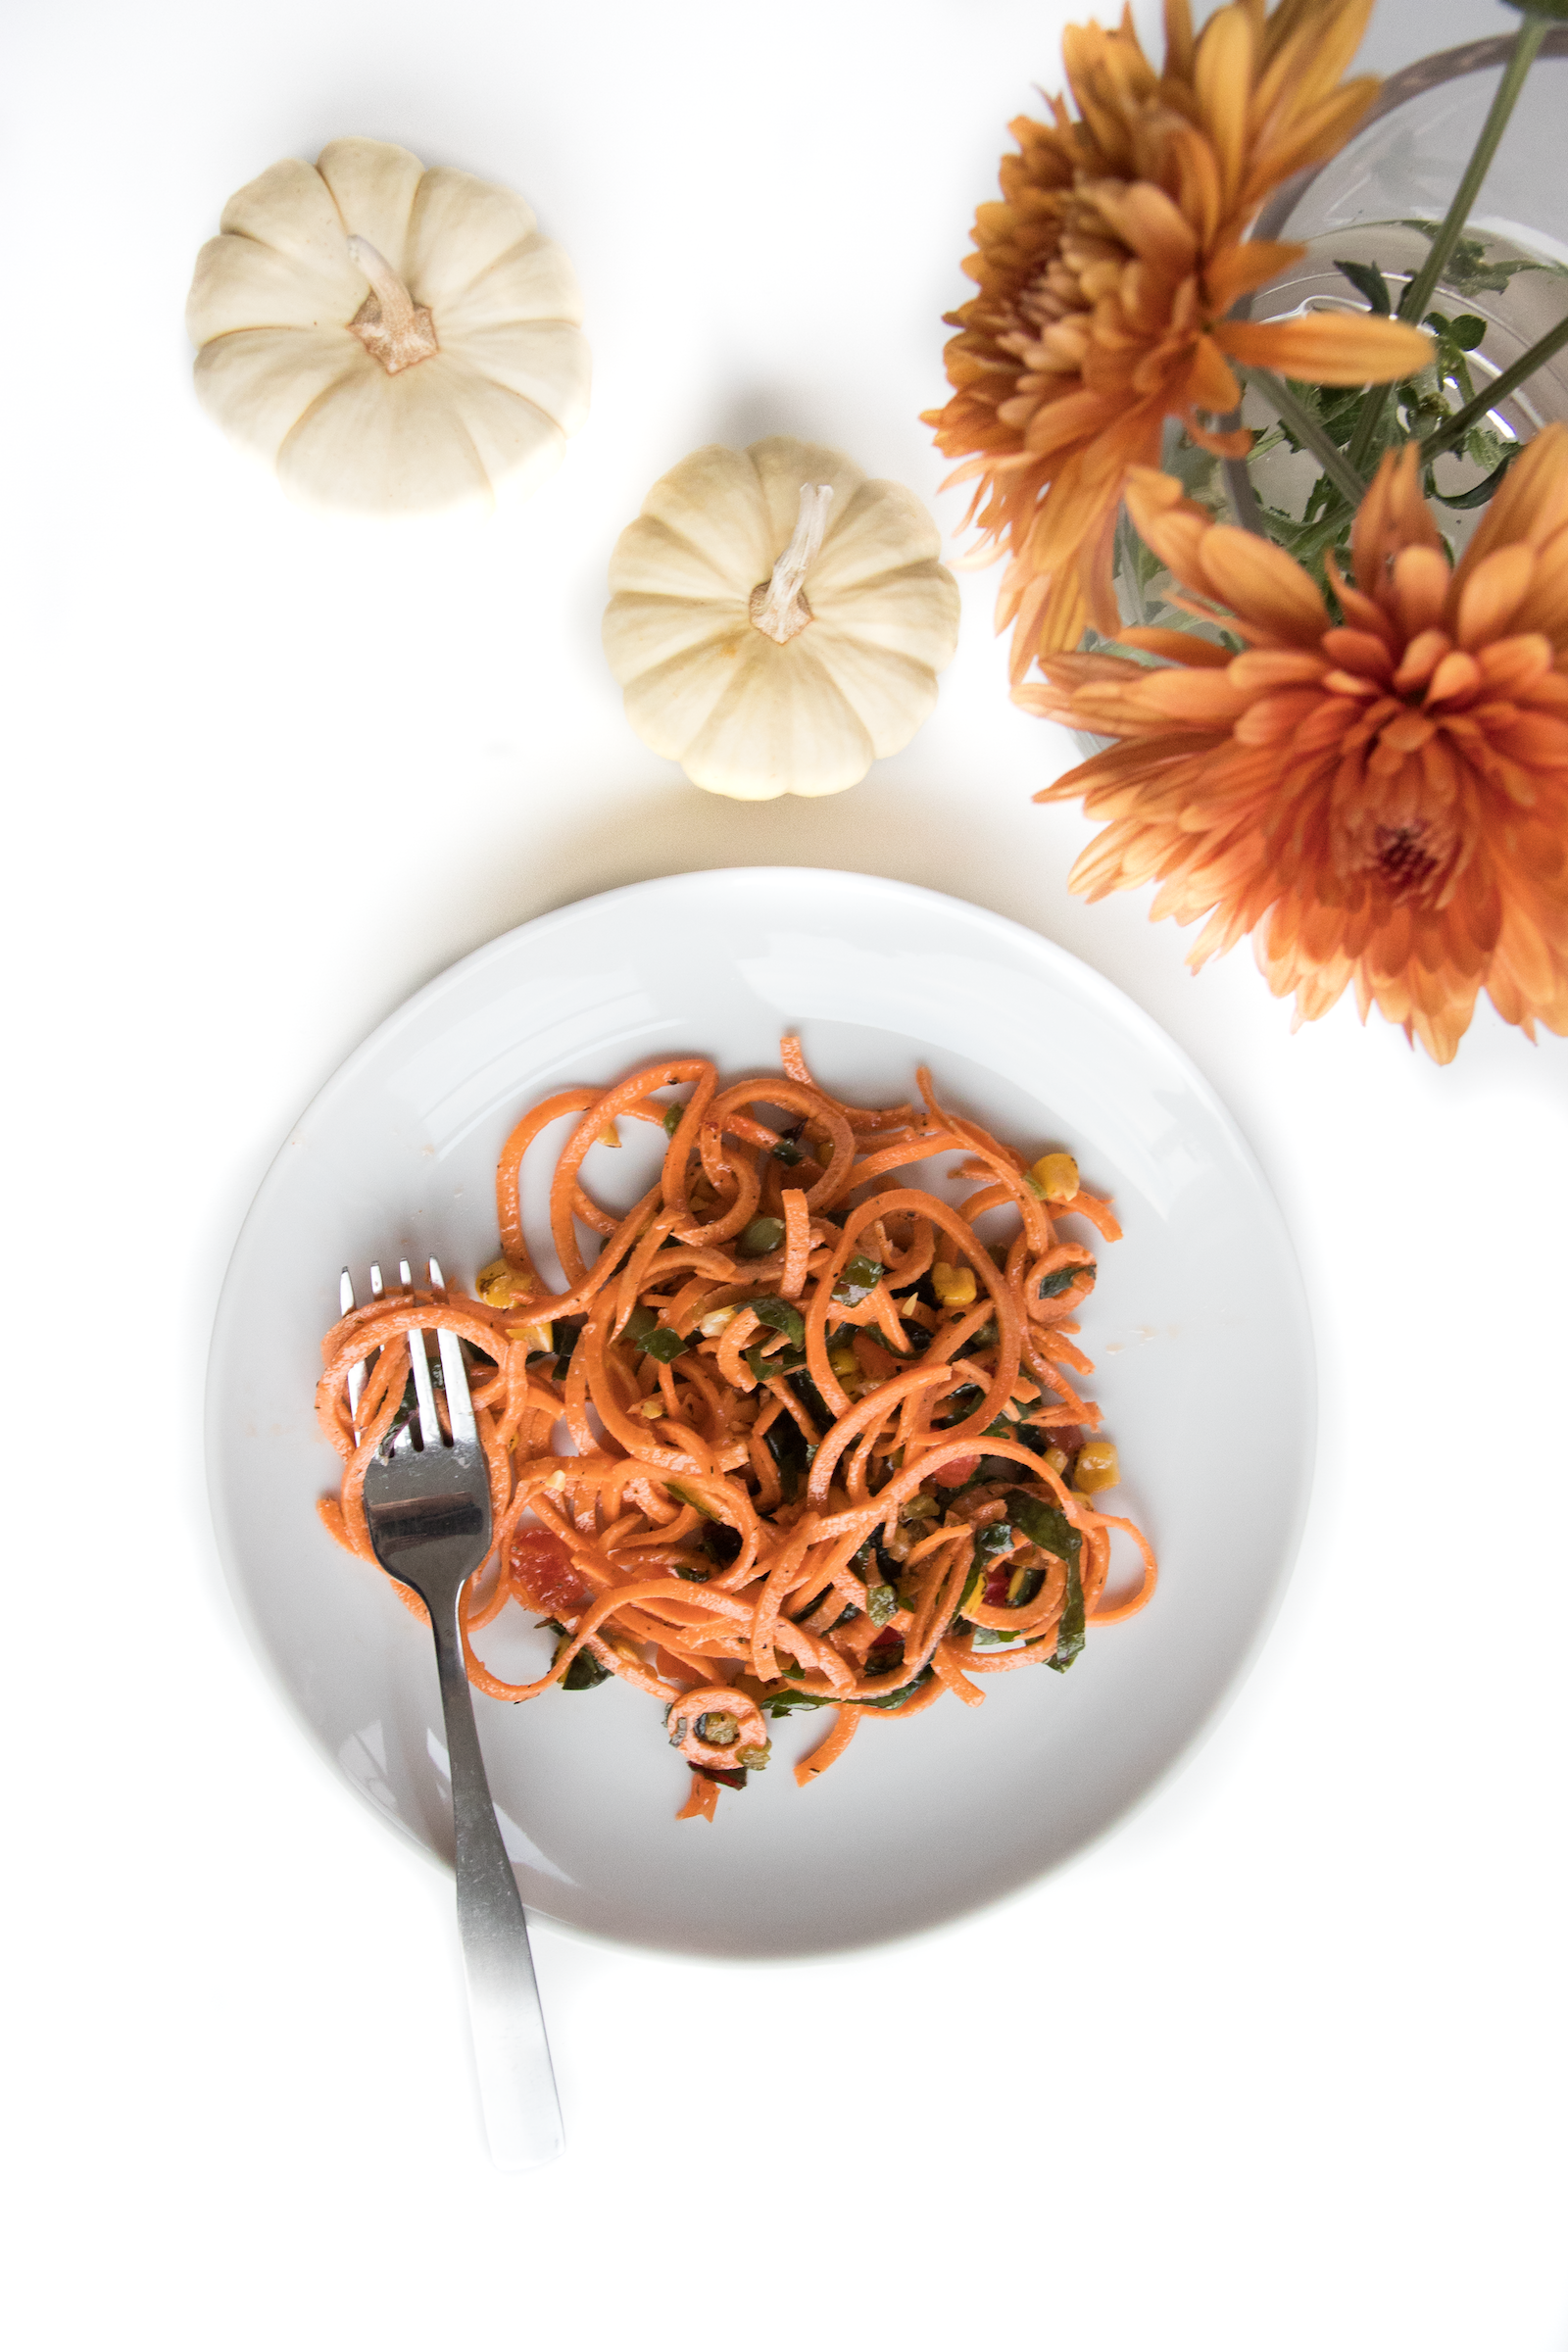 10 Unbelievably Easy Fall Recipes You Need to Try This Week - Sweet Potato Zoodles.png